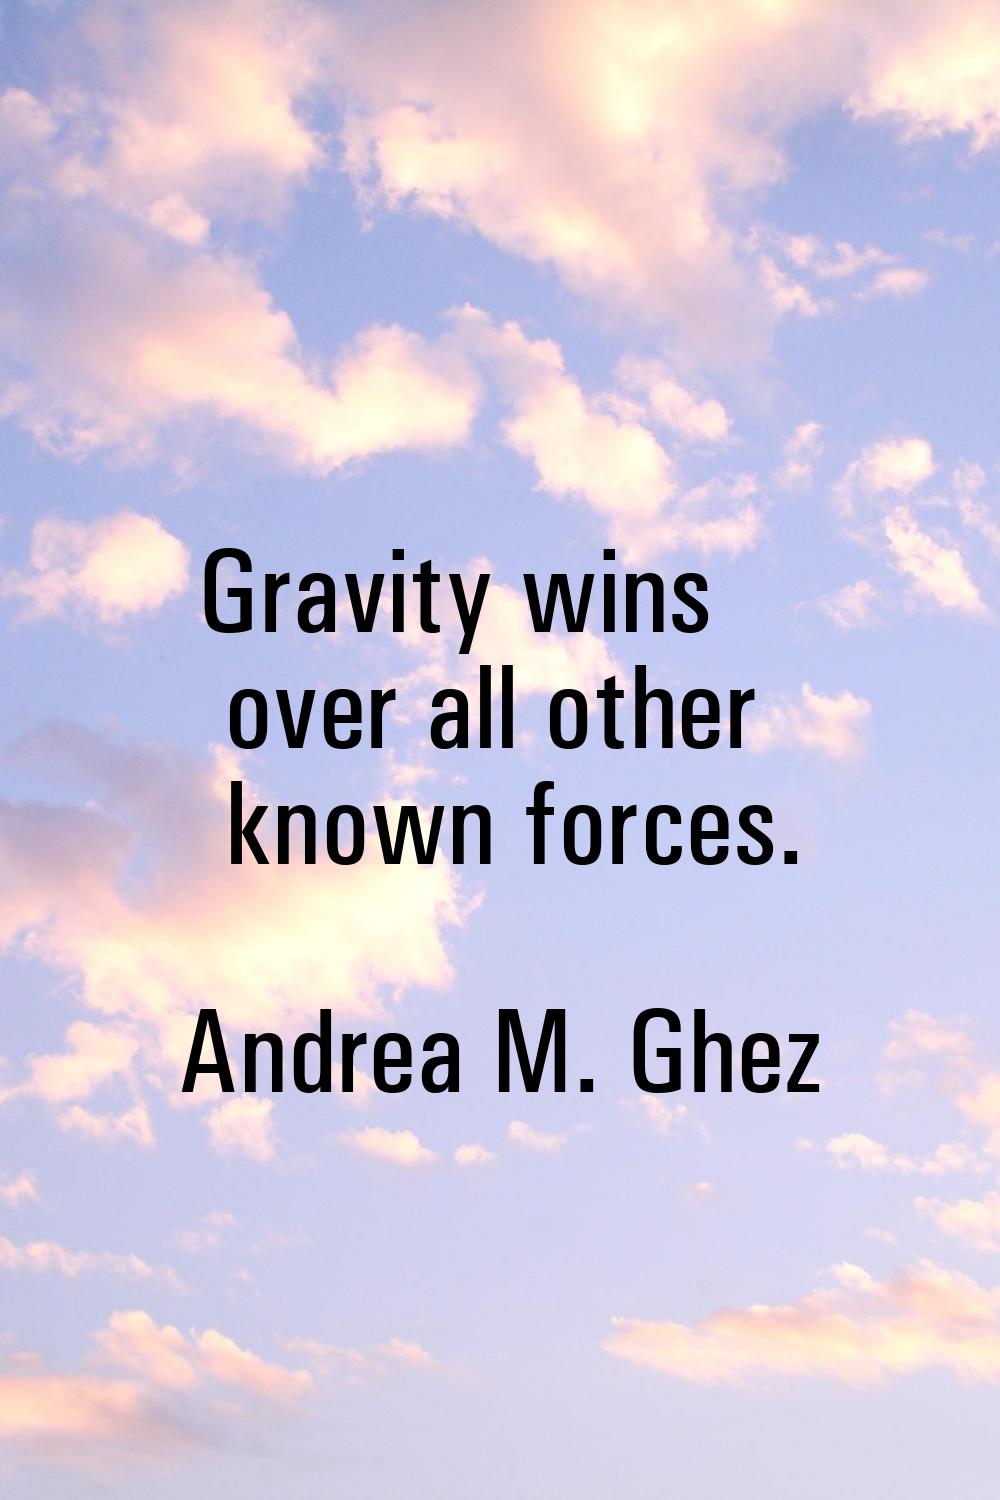 Gravity wins over all other known forces.